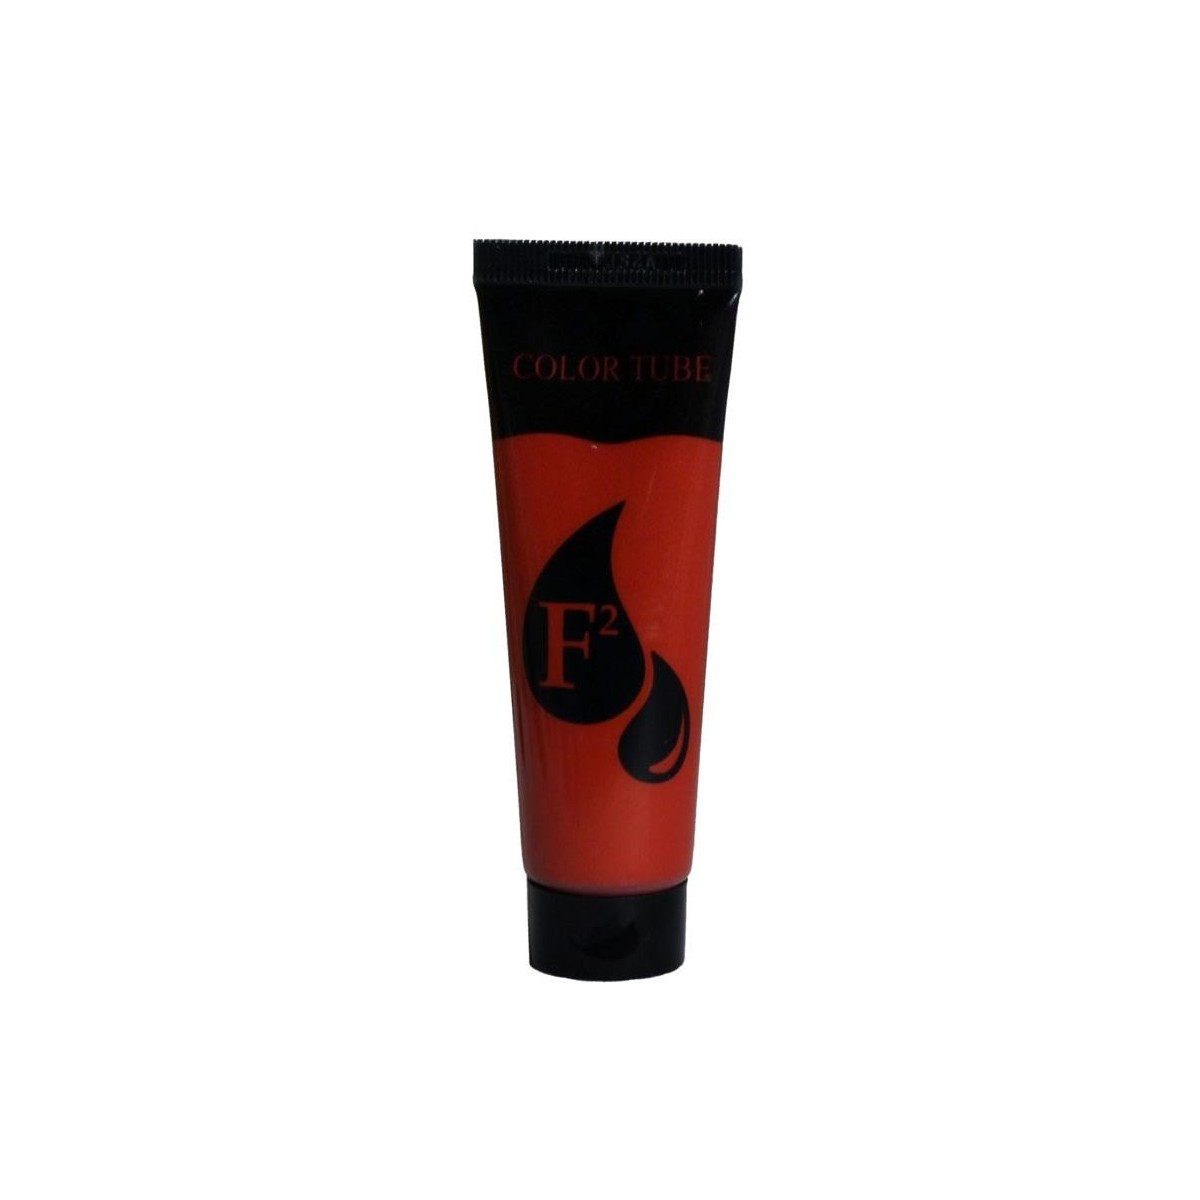 tube maquilage rouge fardel